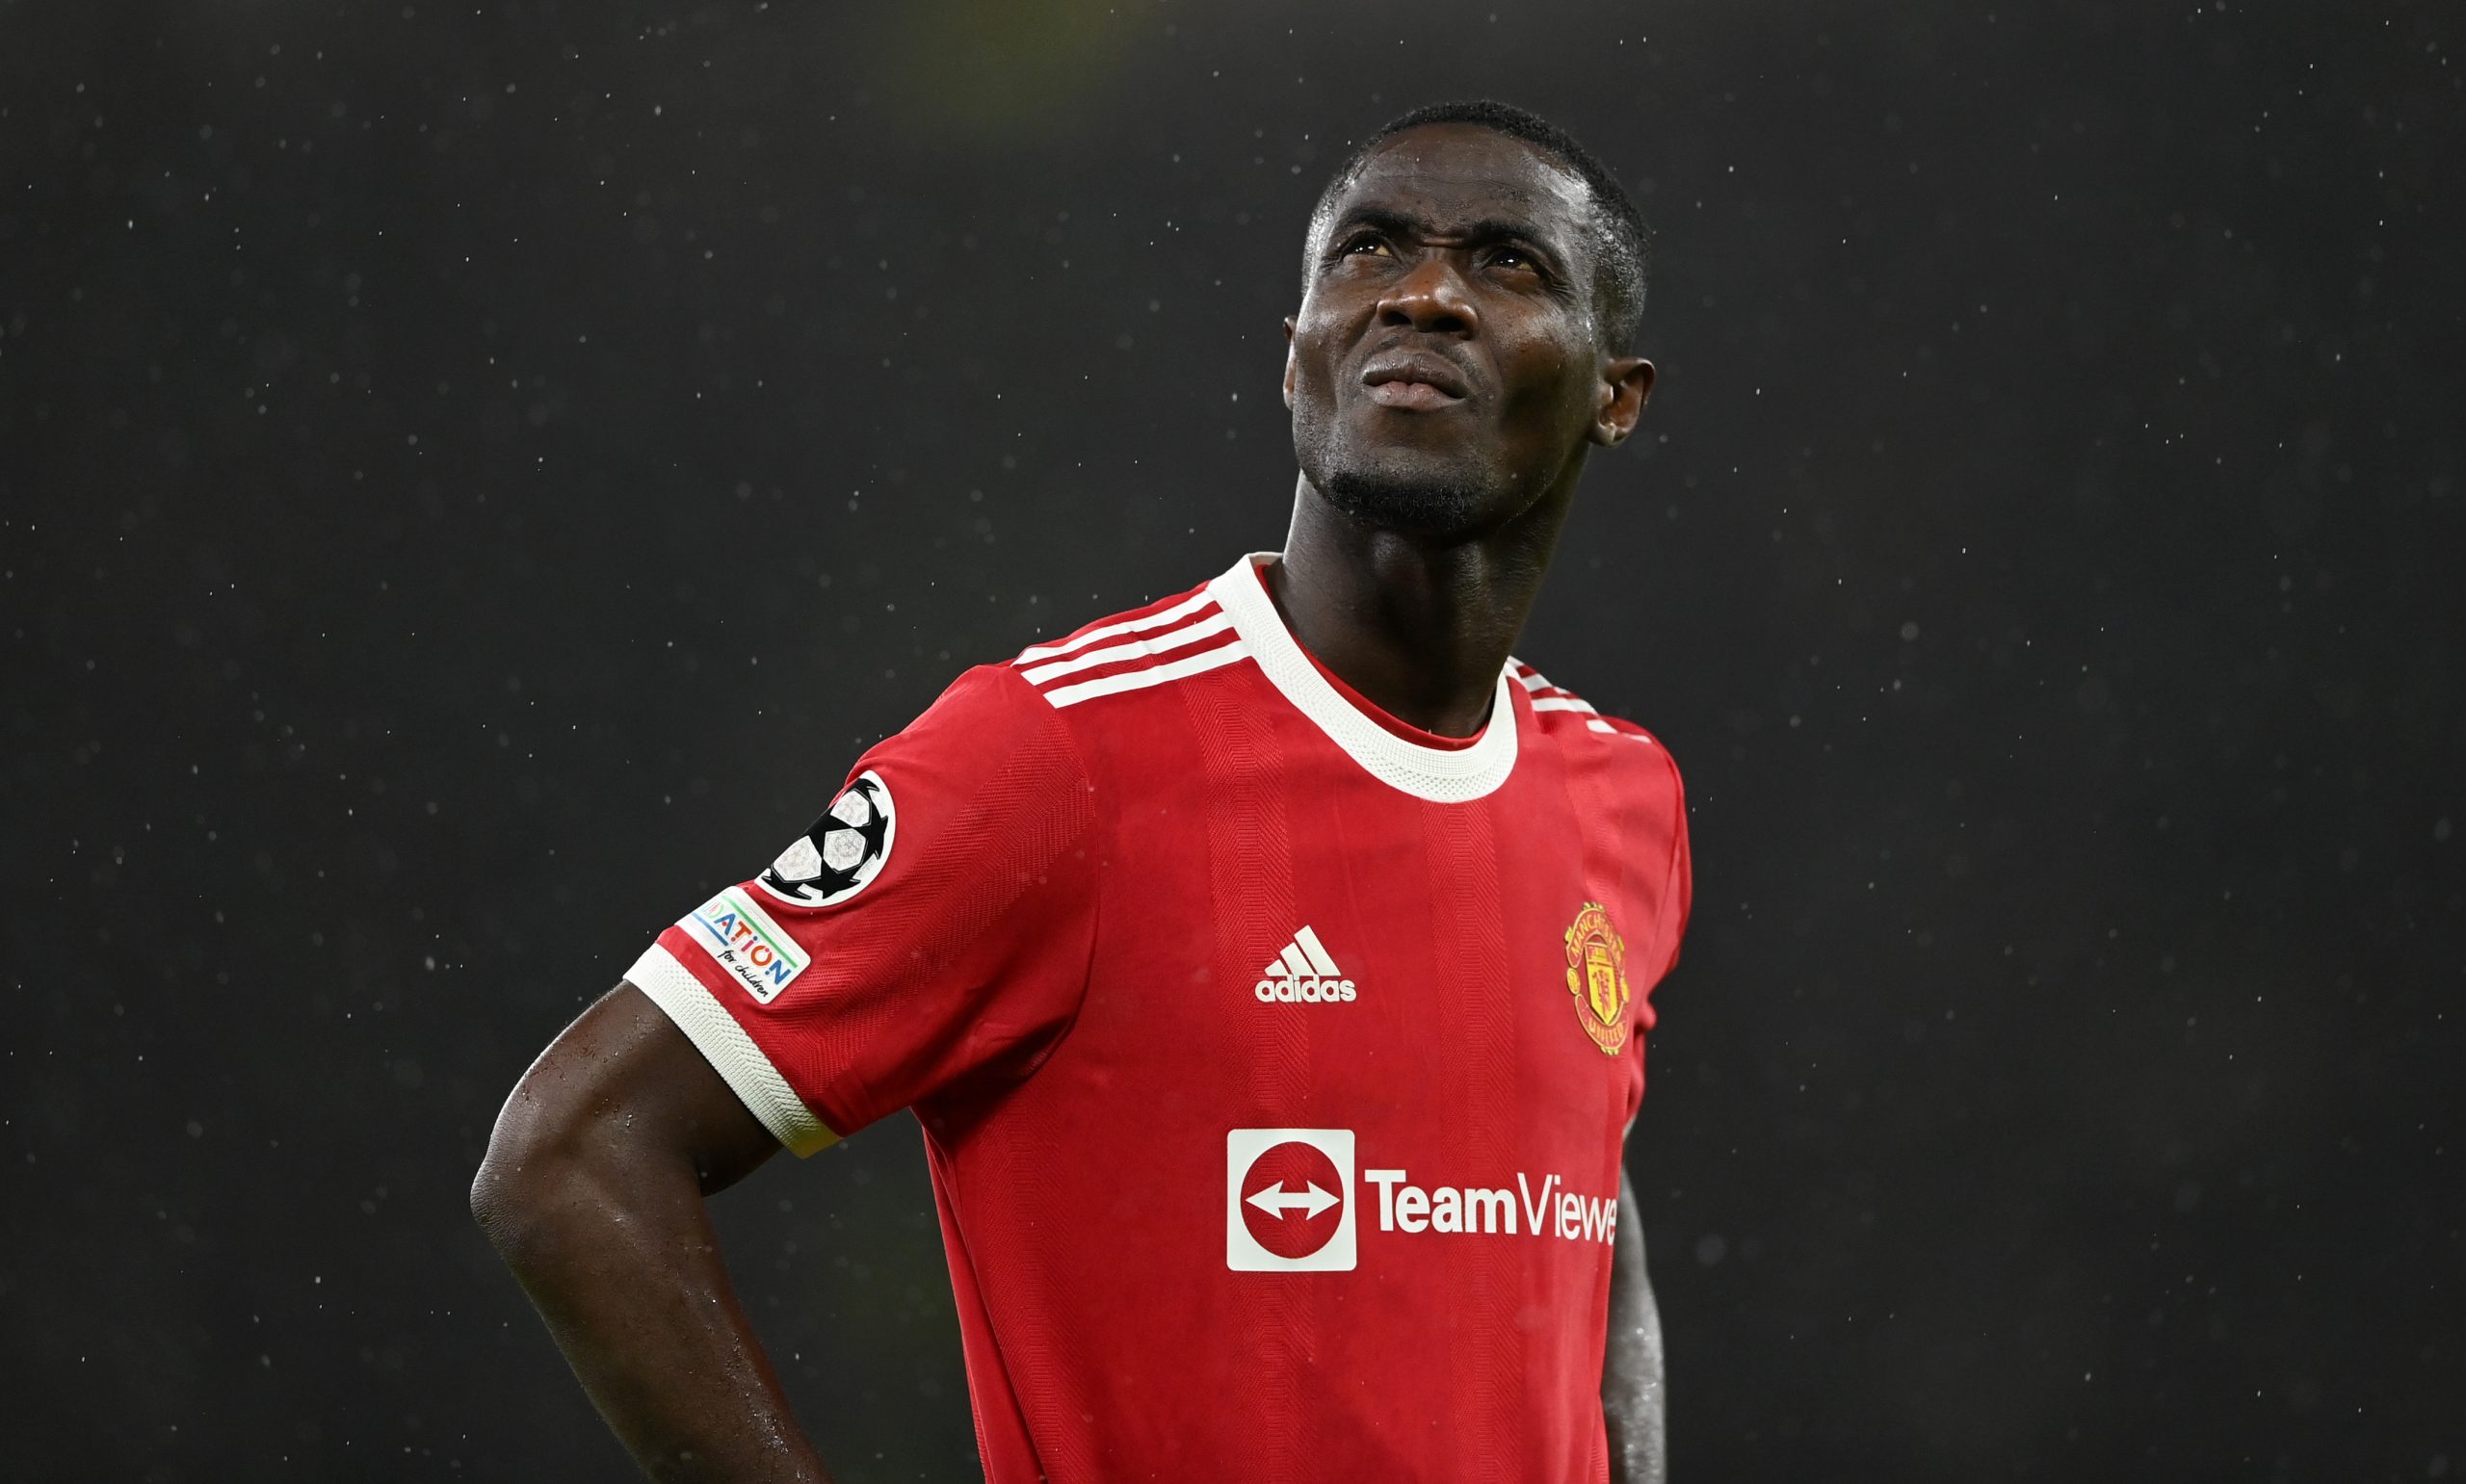 Real Betis interested in Manchester United defender Eric Bailly.